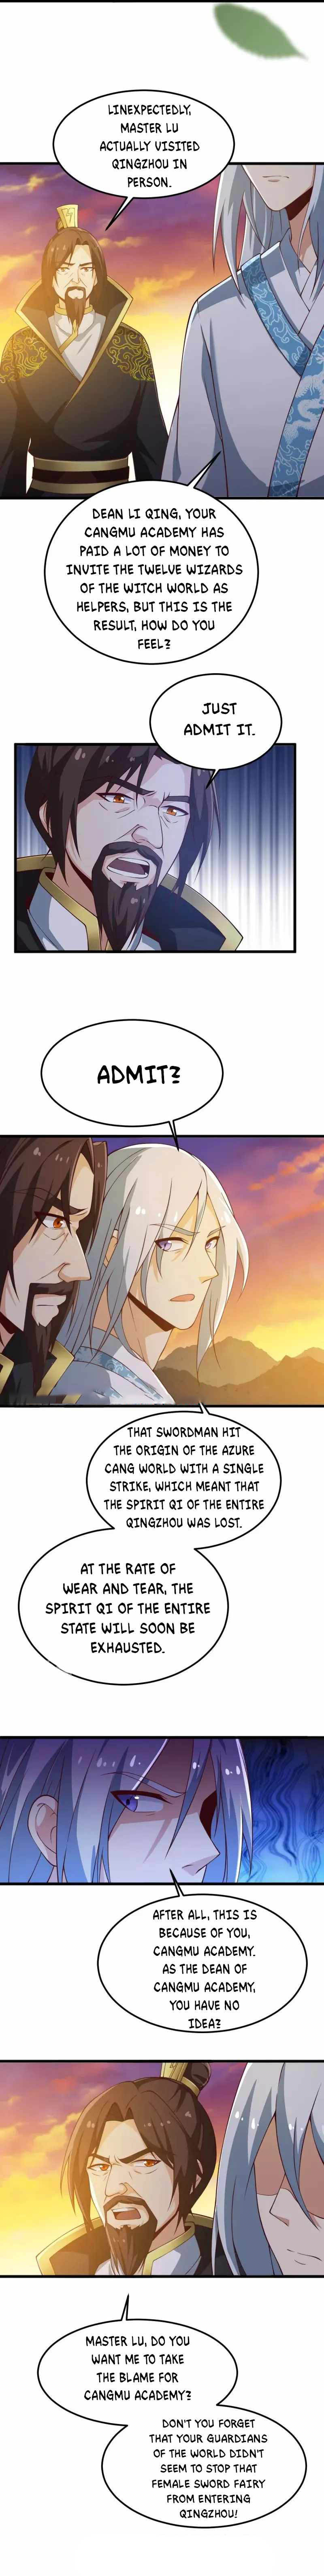 One Sword Reigns Supreme Chapter 242 Page 5